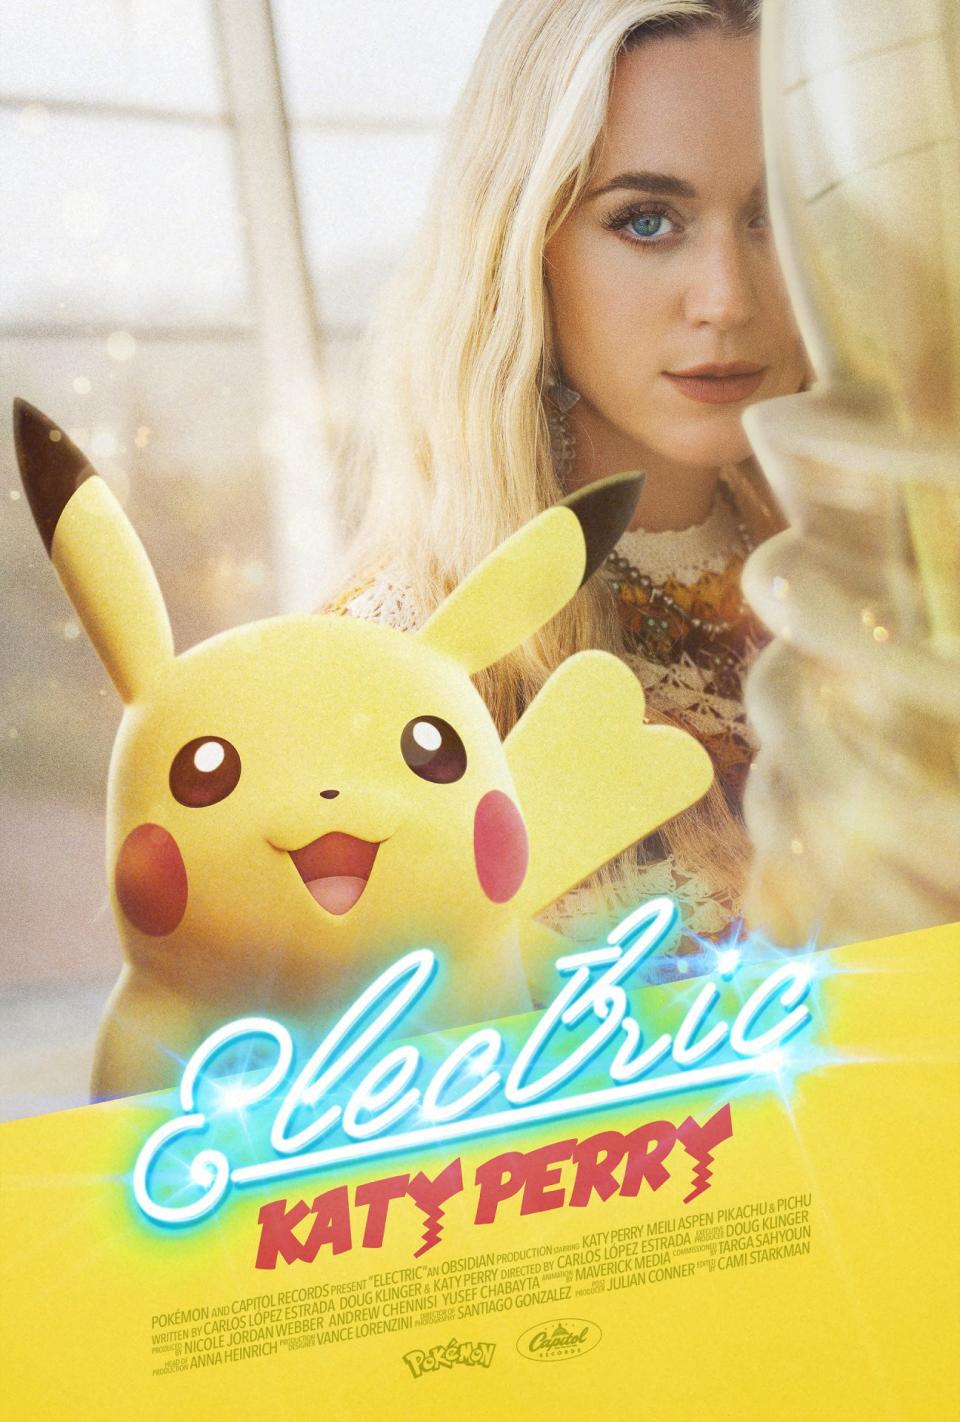 Pikachu and Katy Perry on the "Electric" poster.